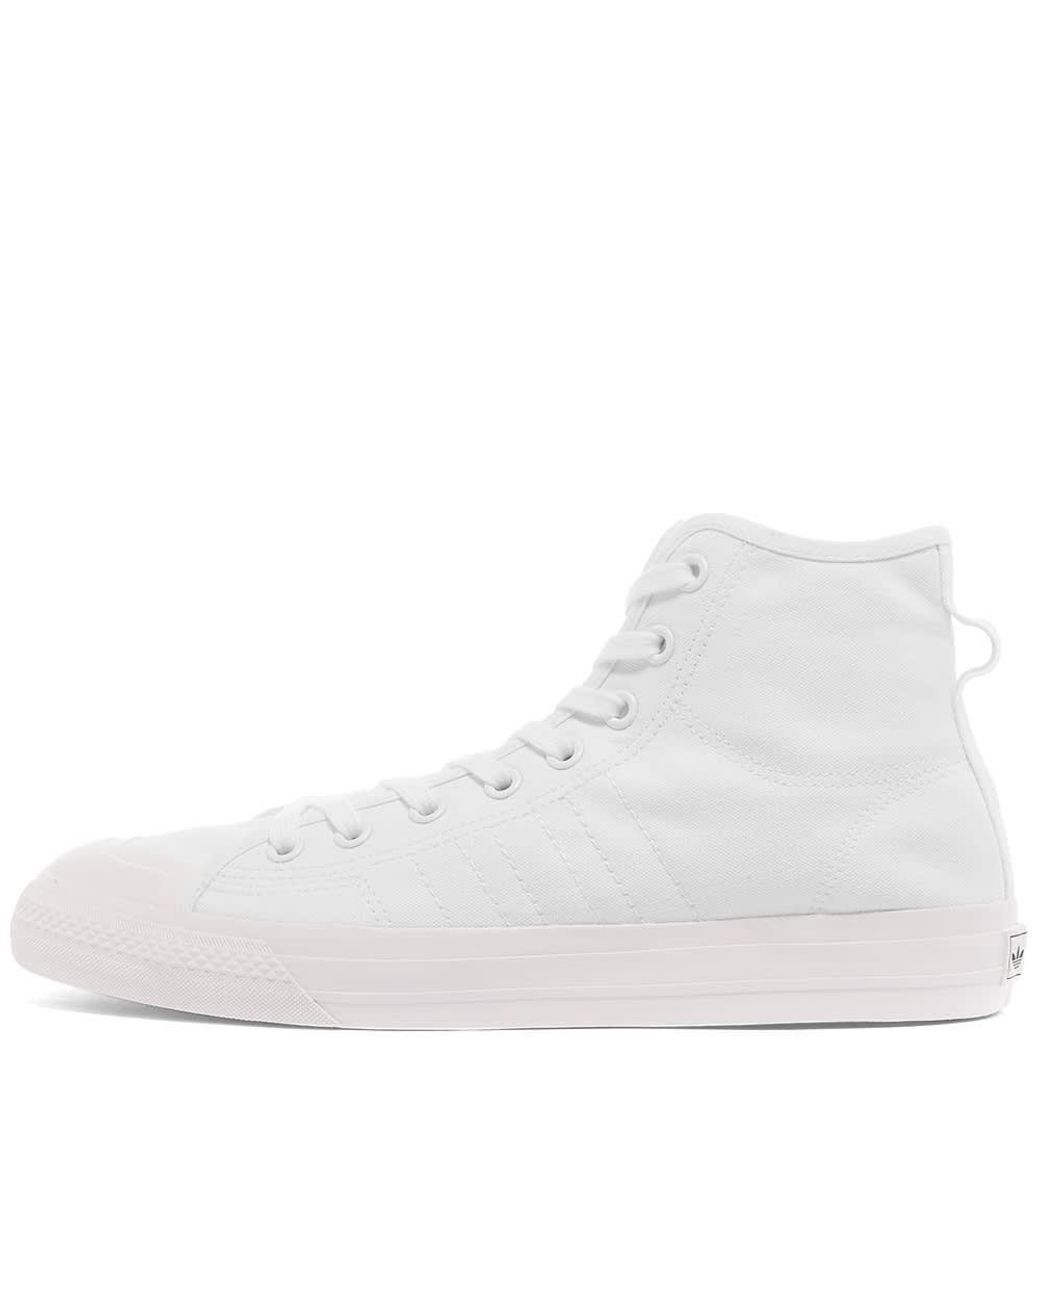 White Lyst for in Trainers adidas Men Hi Top | Nizza Rf